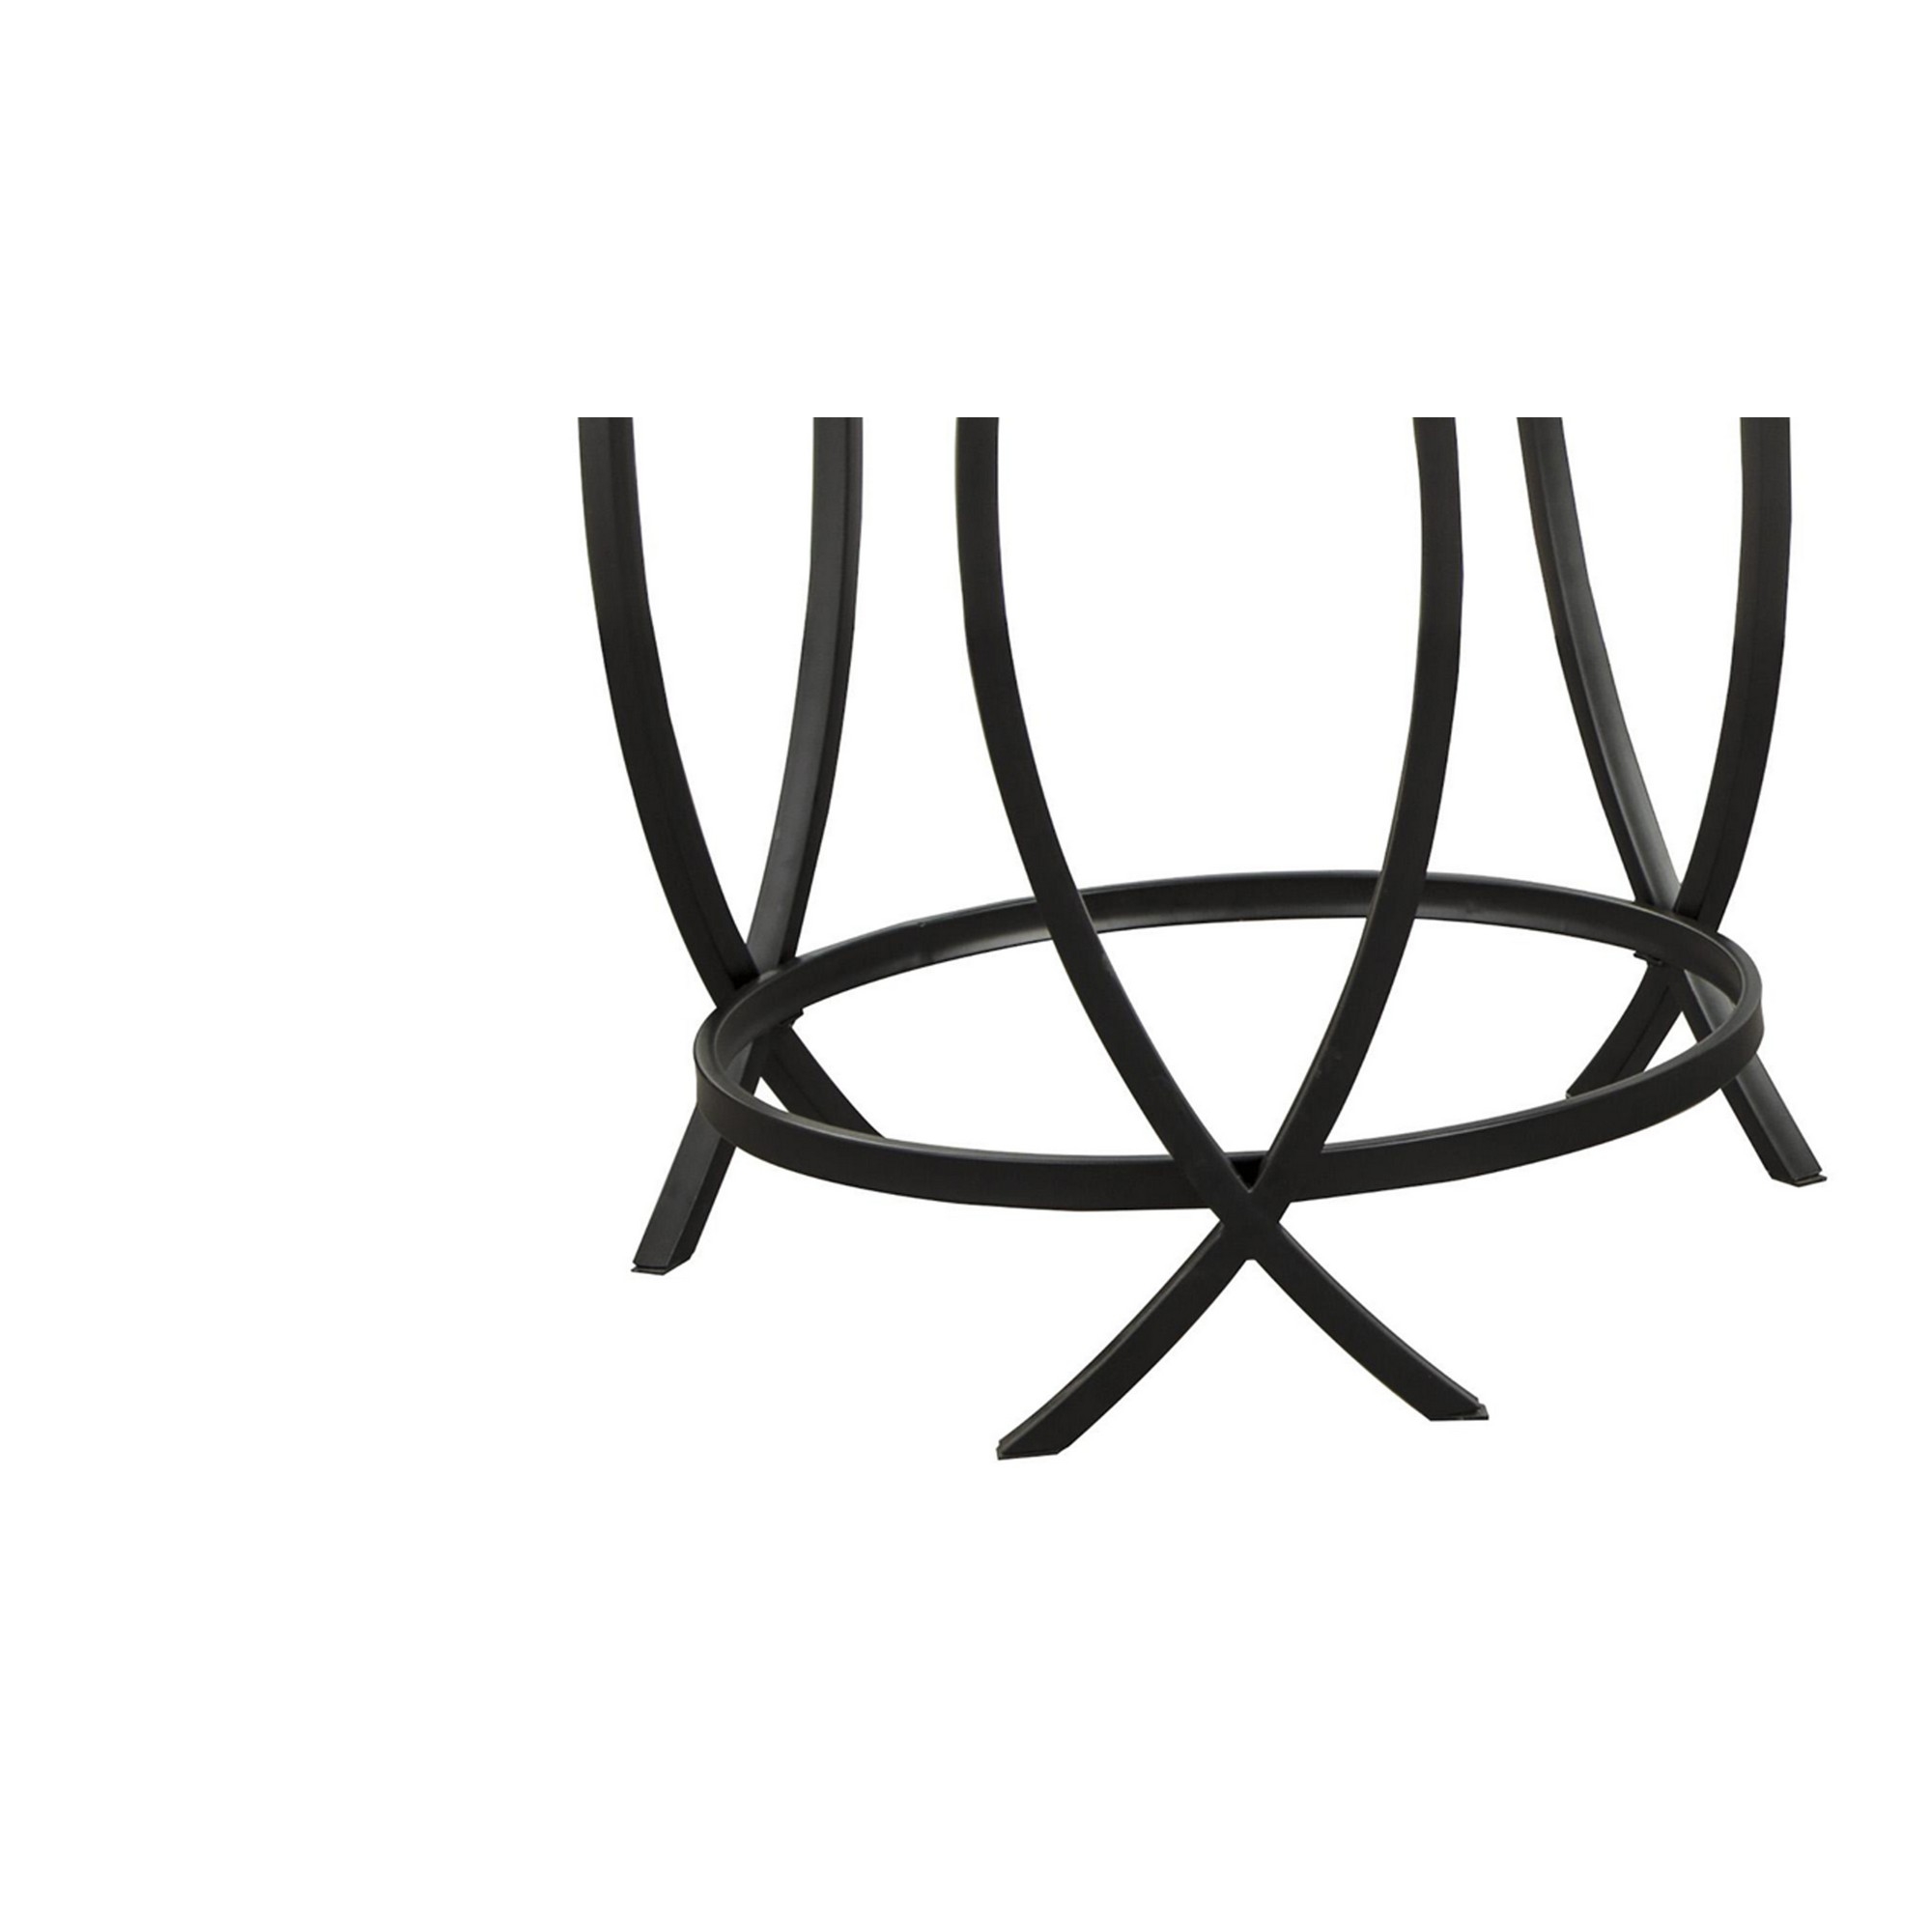 Contemporary Round Table Set With Glass Top And Geometric Metal Body, Black- Saltoro Sherpi